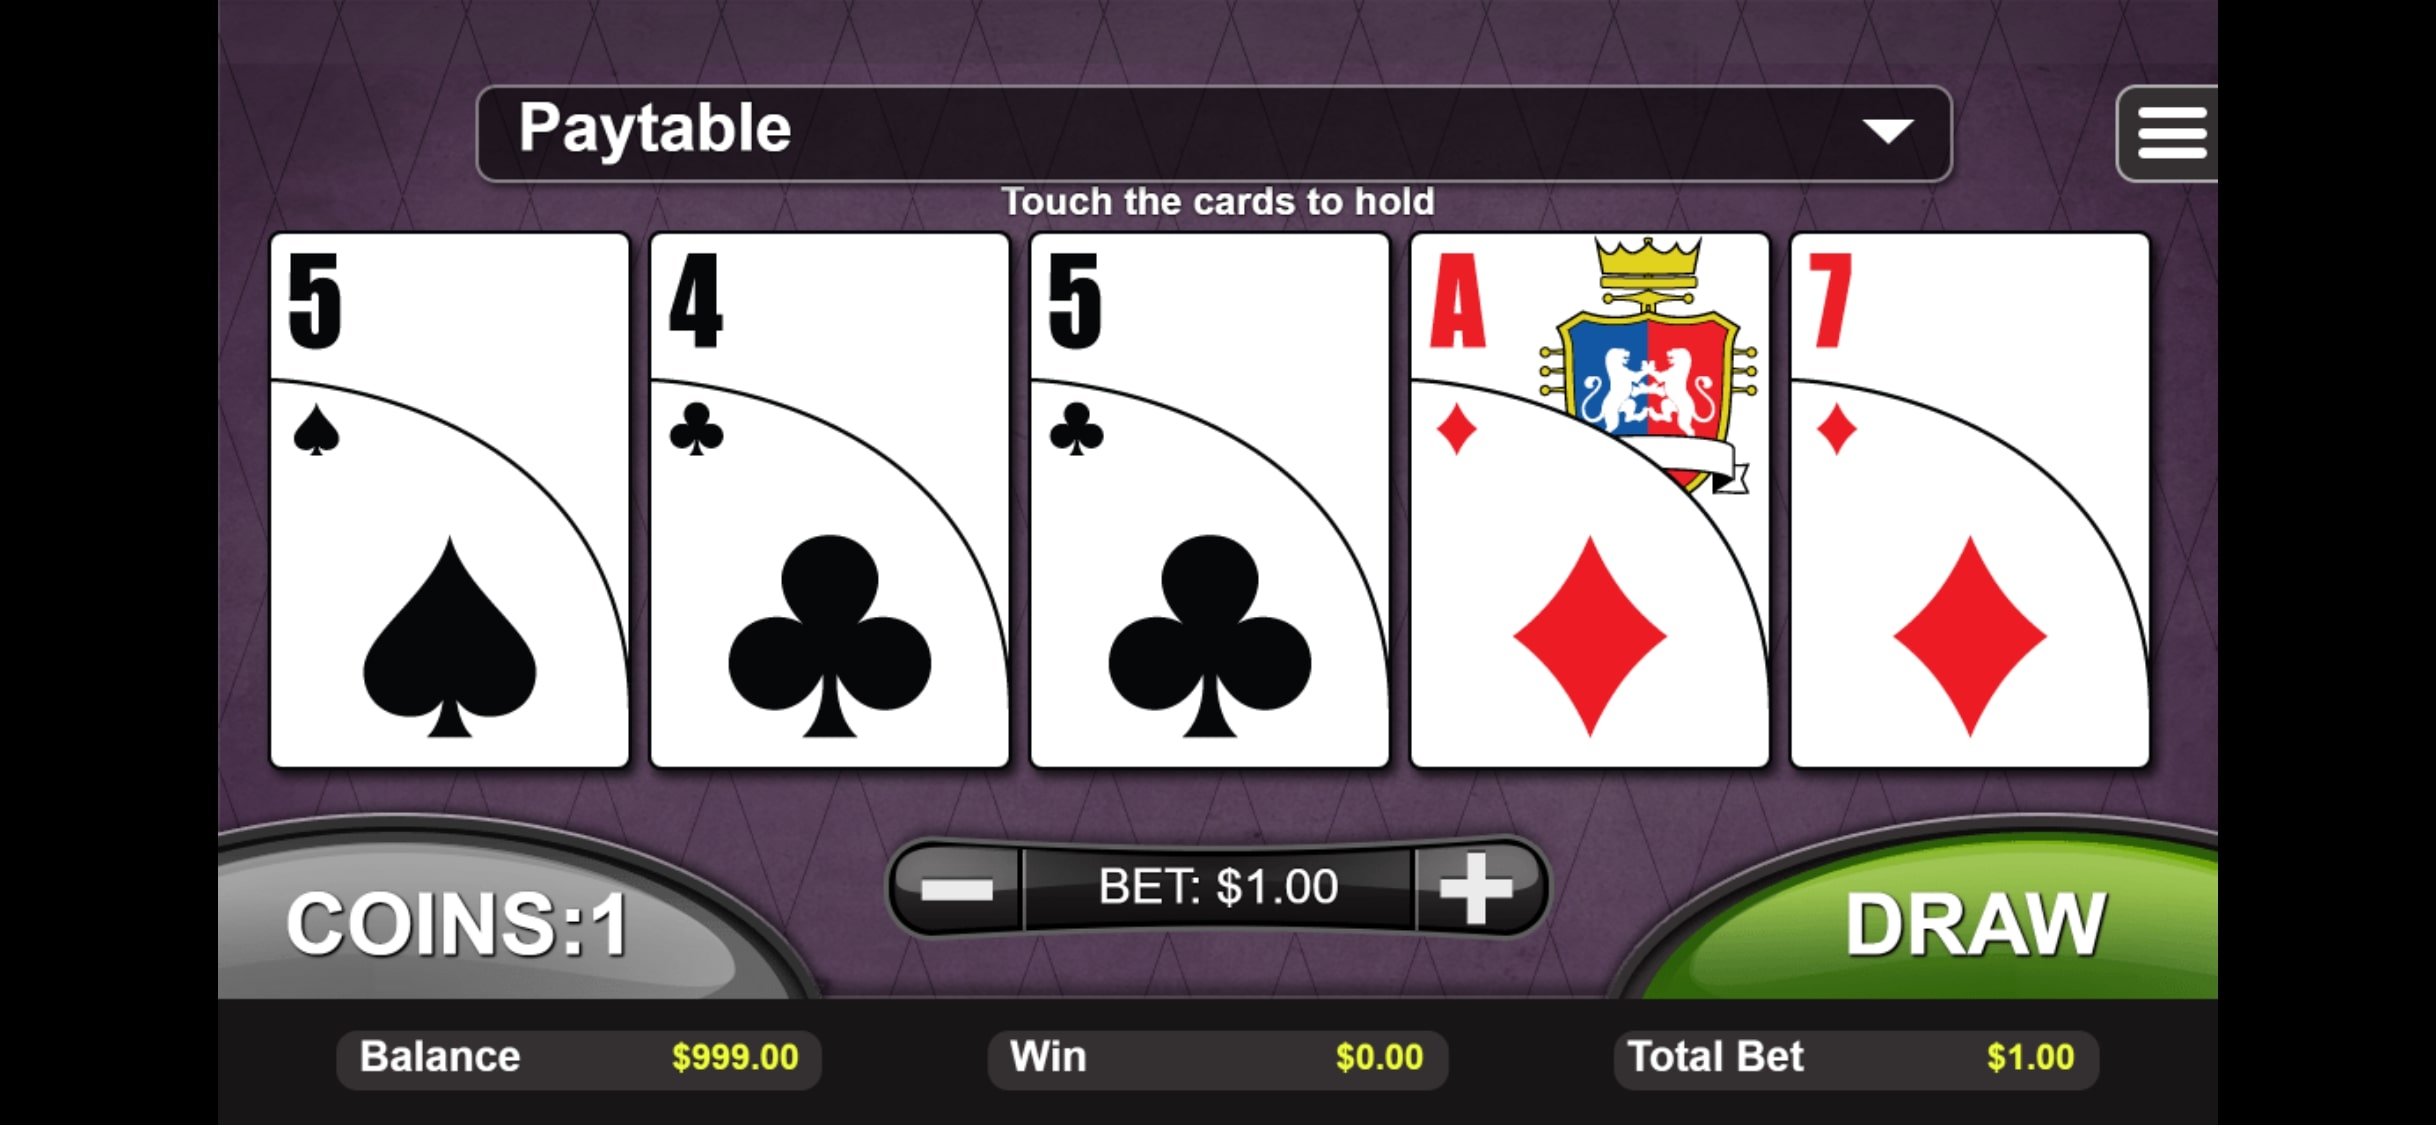 Royal Ace Casino Mobile Slots Review